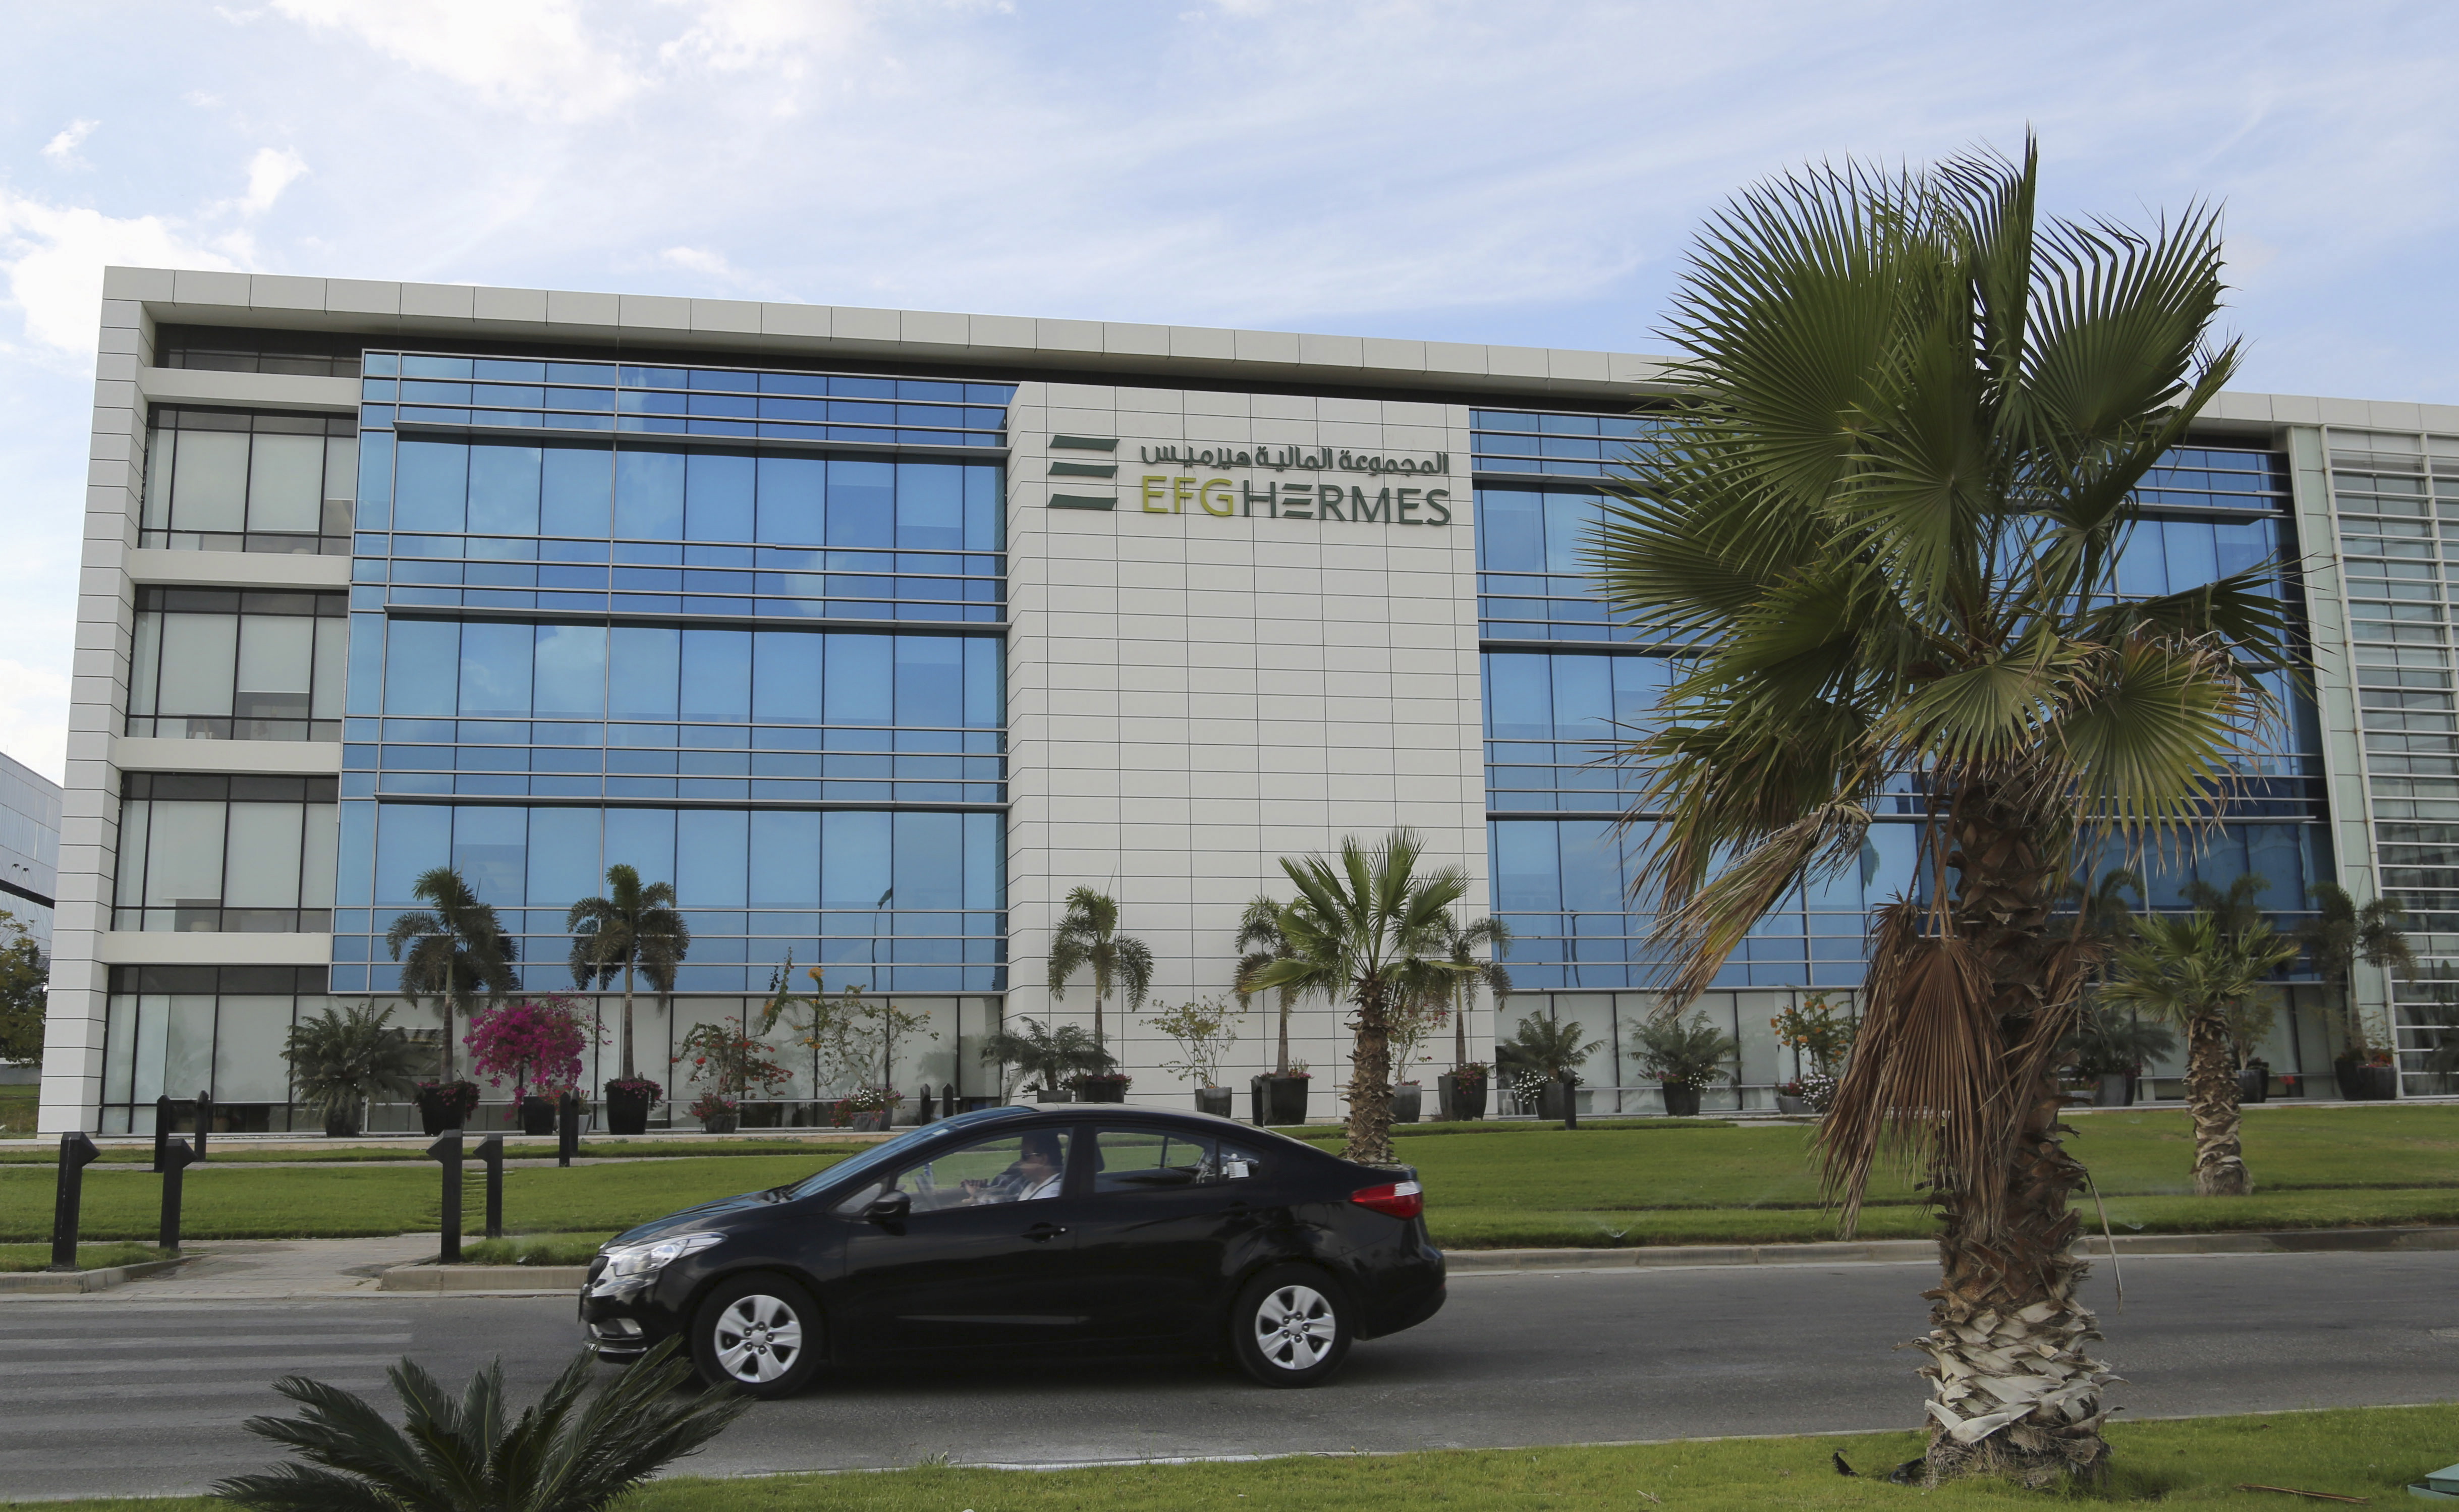 The building of EFG-Hermes, also known as Egyptian Financial Group Hermes Holding Co SAE, is seen at the Smart Village in the outskirts of Cairo, Egypt, October 27, 2015. REUTERS/Asmaa Waguih